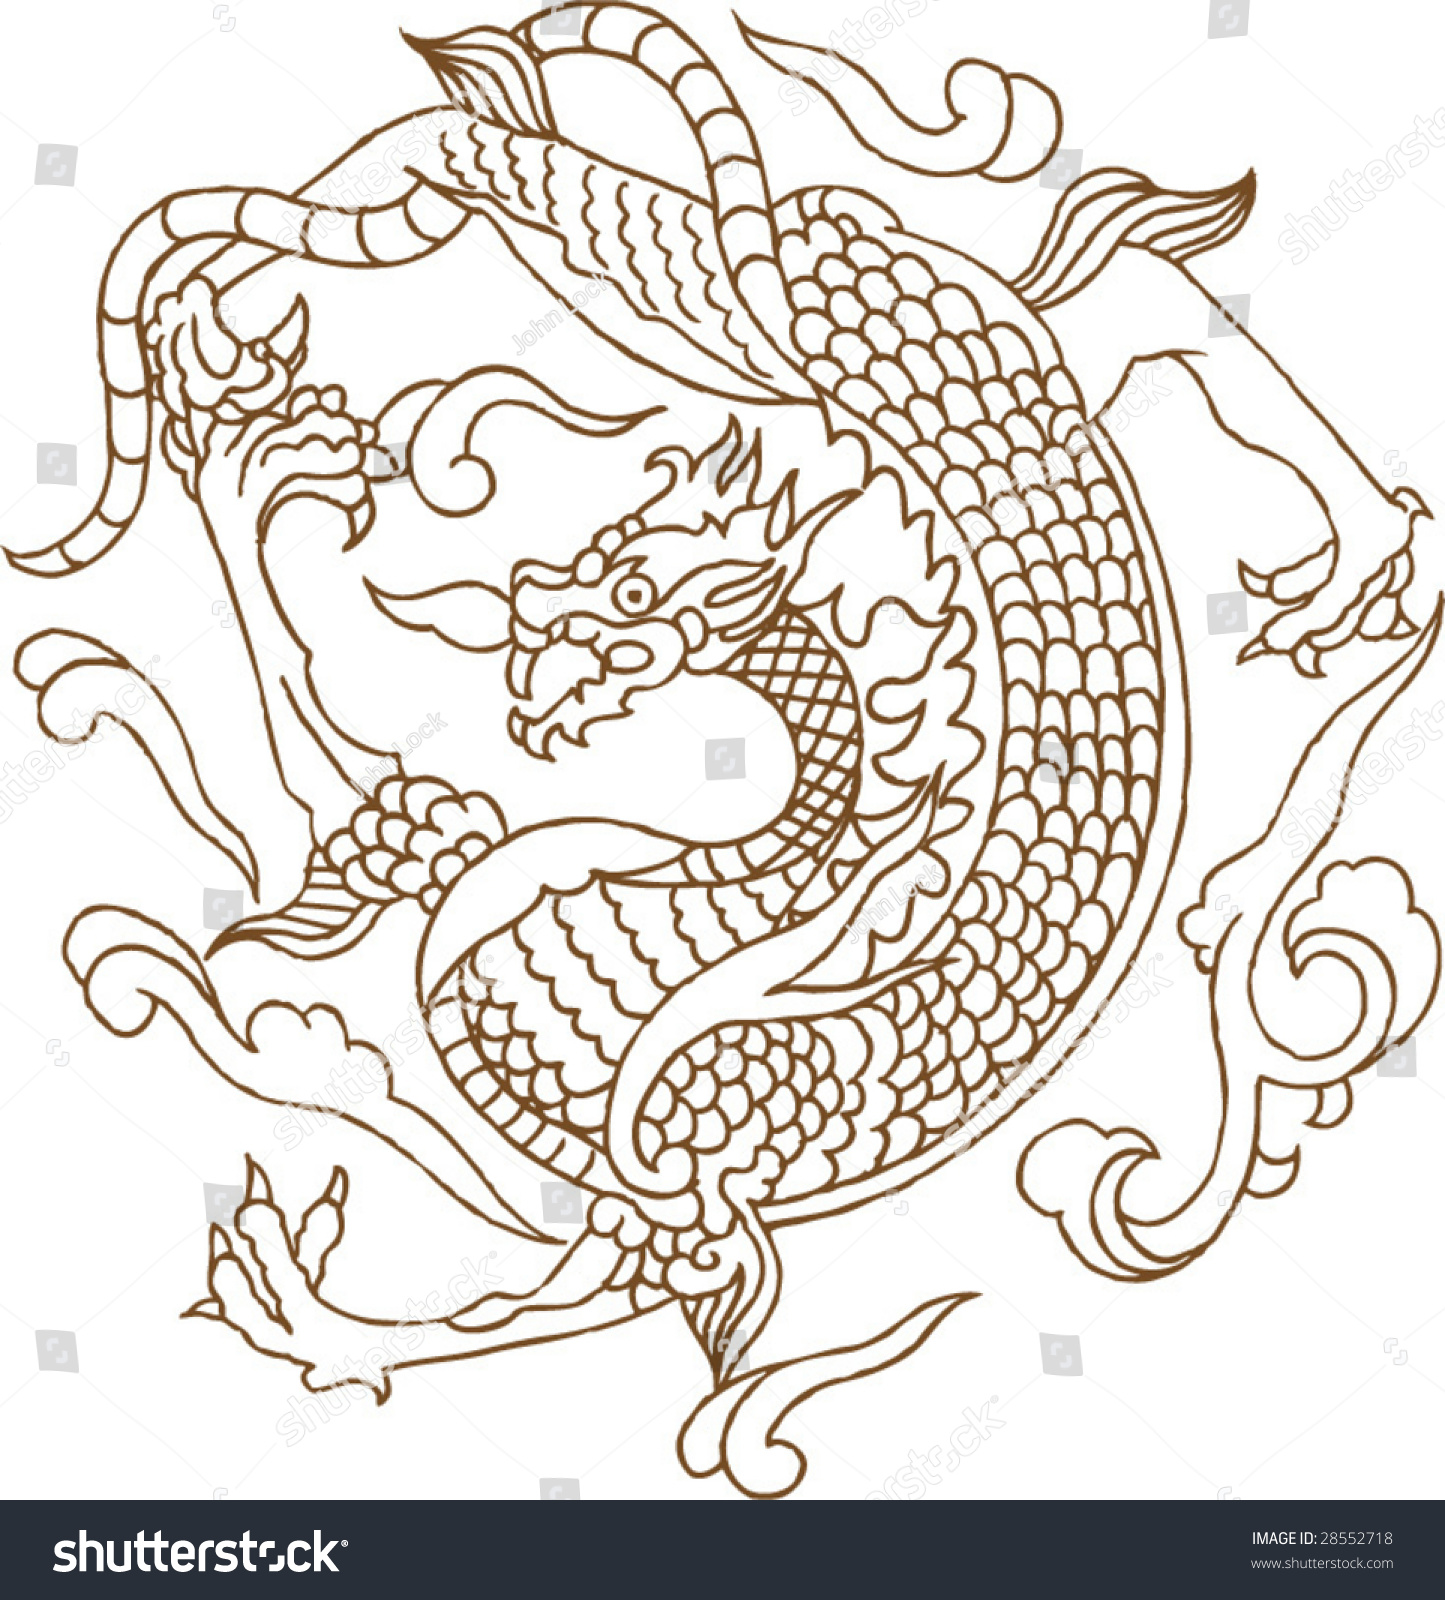 Vector Of Traditional Chinese Dragon Pattern - 28552718 : Shutterstock